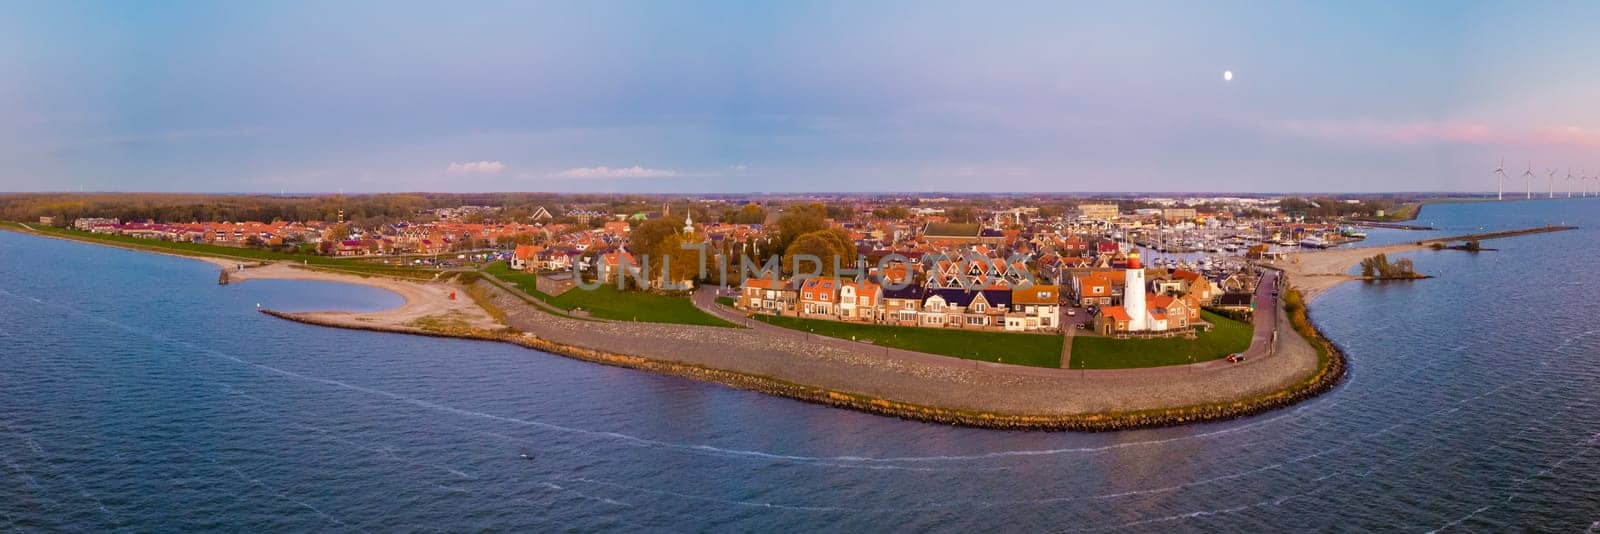 Lighthouse of Urk Netherlands during sunset in the Netherlands. drone aerial view of old Dutch fishing village in Flevoland